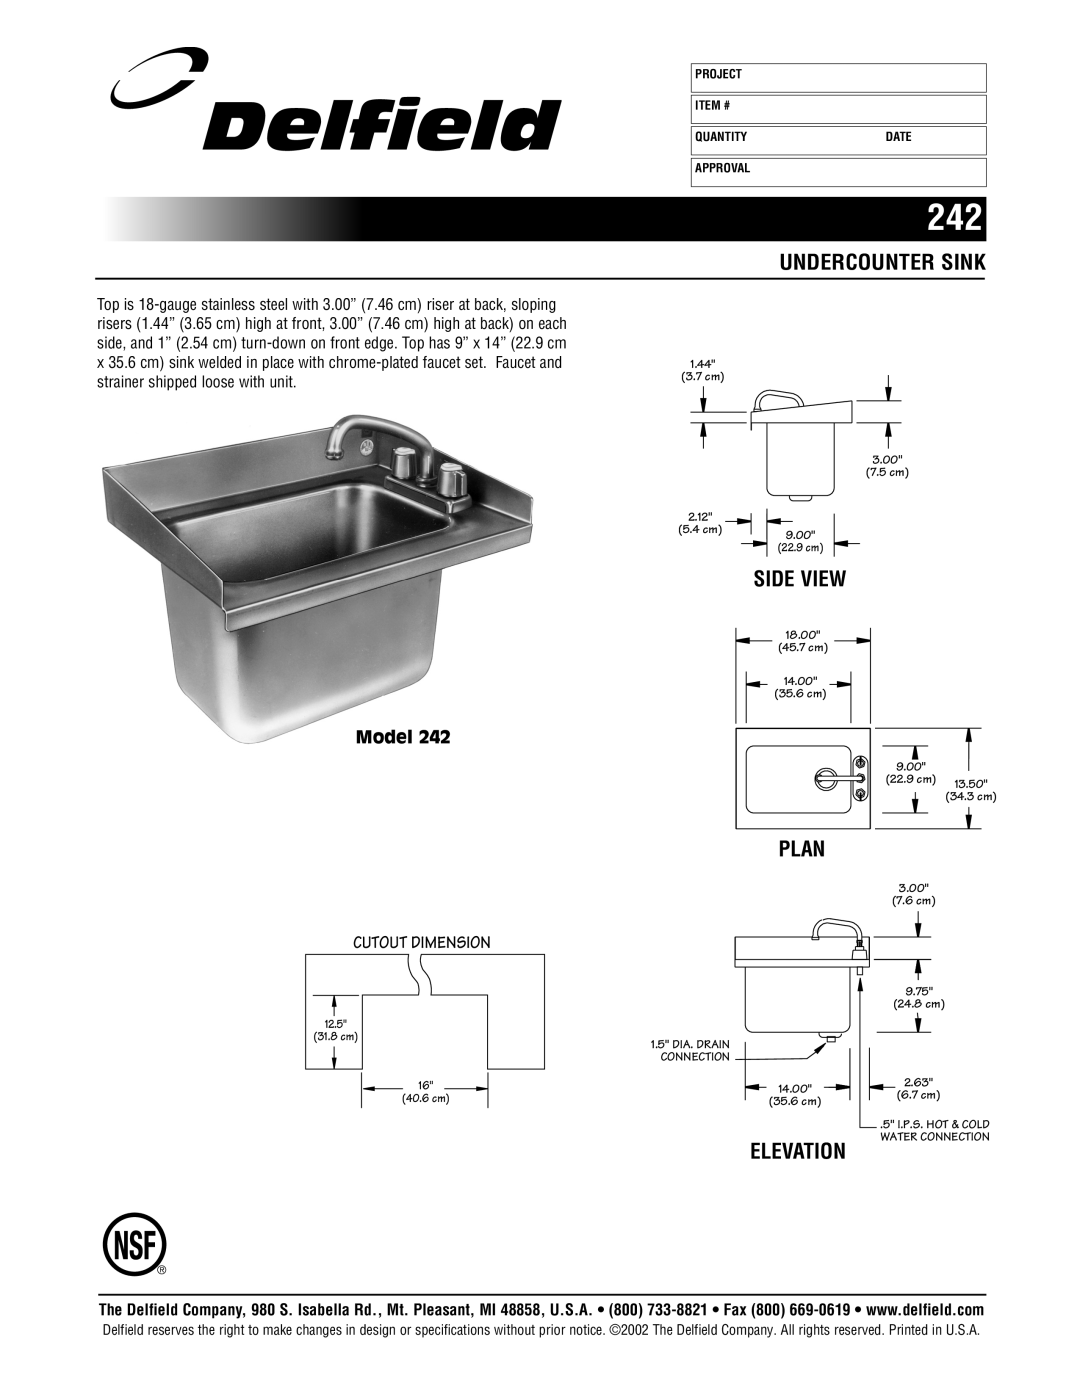 Delfield 242 specifications Undercounter Sink, Side View, Plan, Model, Cutout Dimension, Elevation 